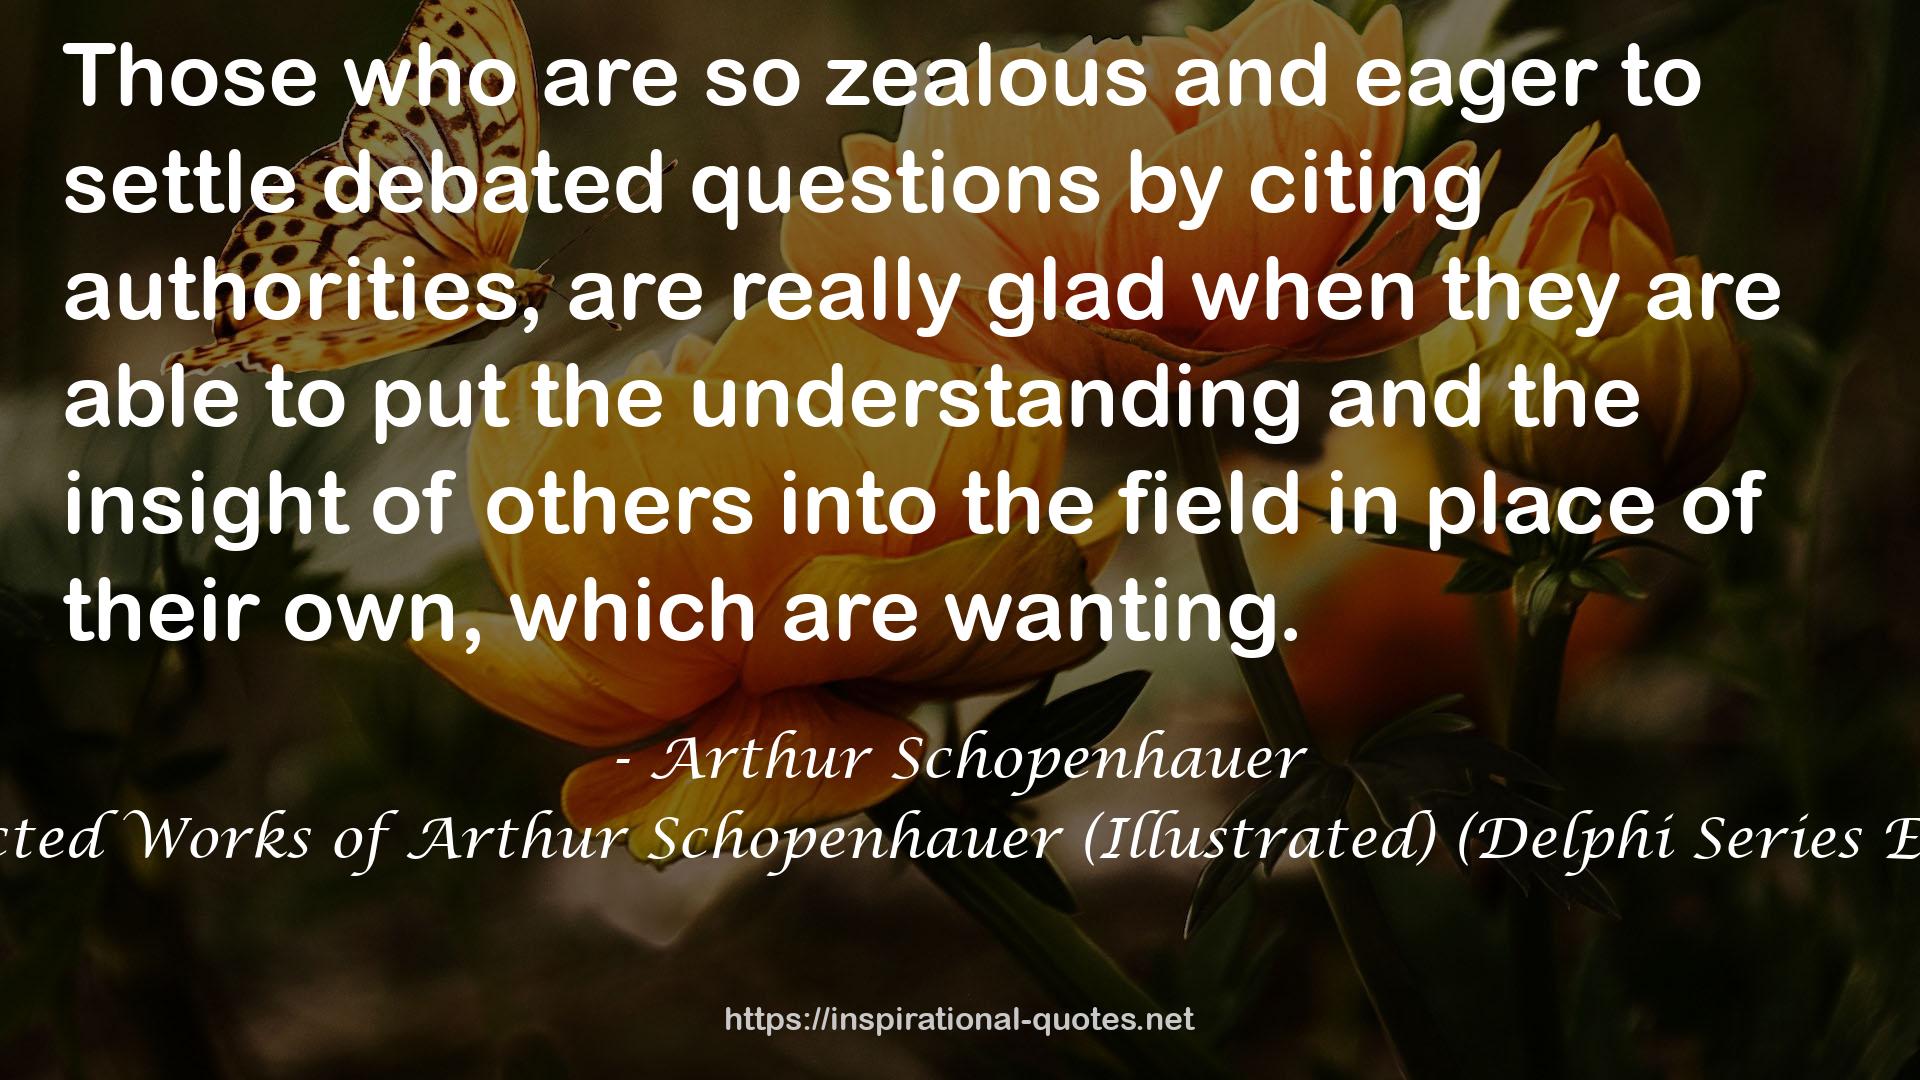 Delphi Collected Works of Arthur Schopenhauer (Illustrated) (Delphi Series Eight Book 12) QUOTES